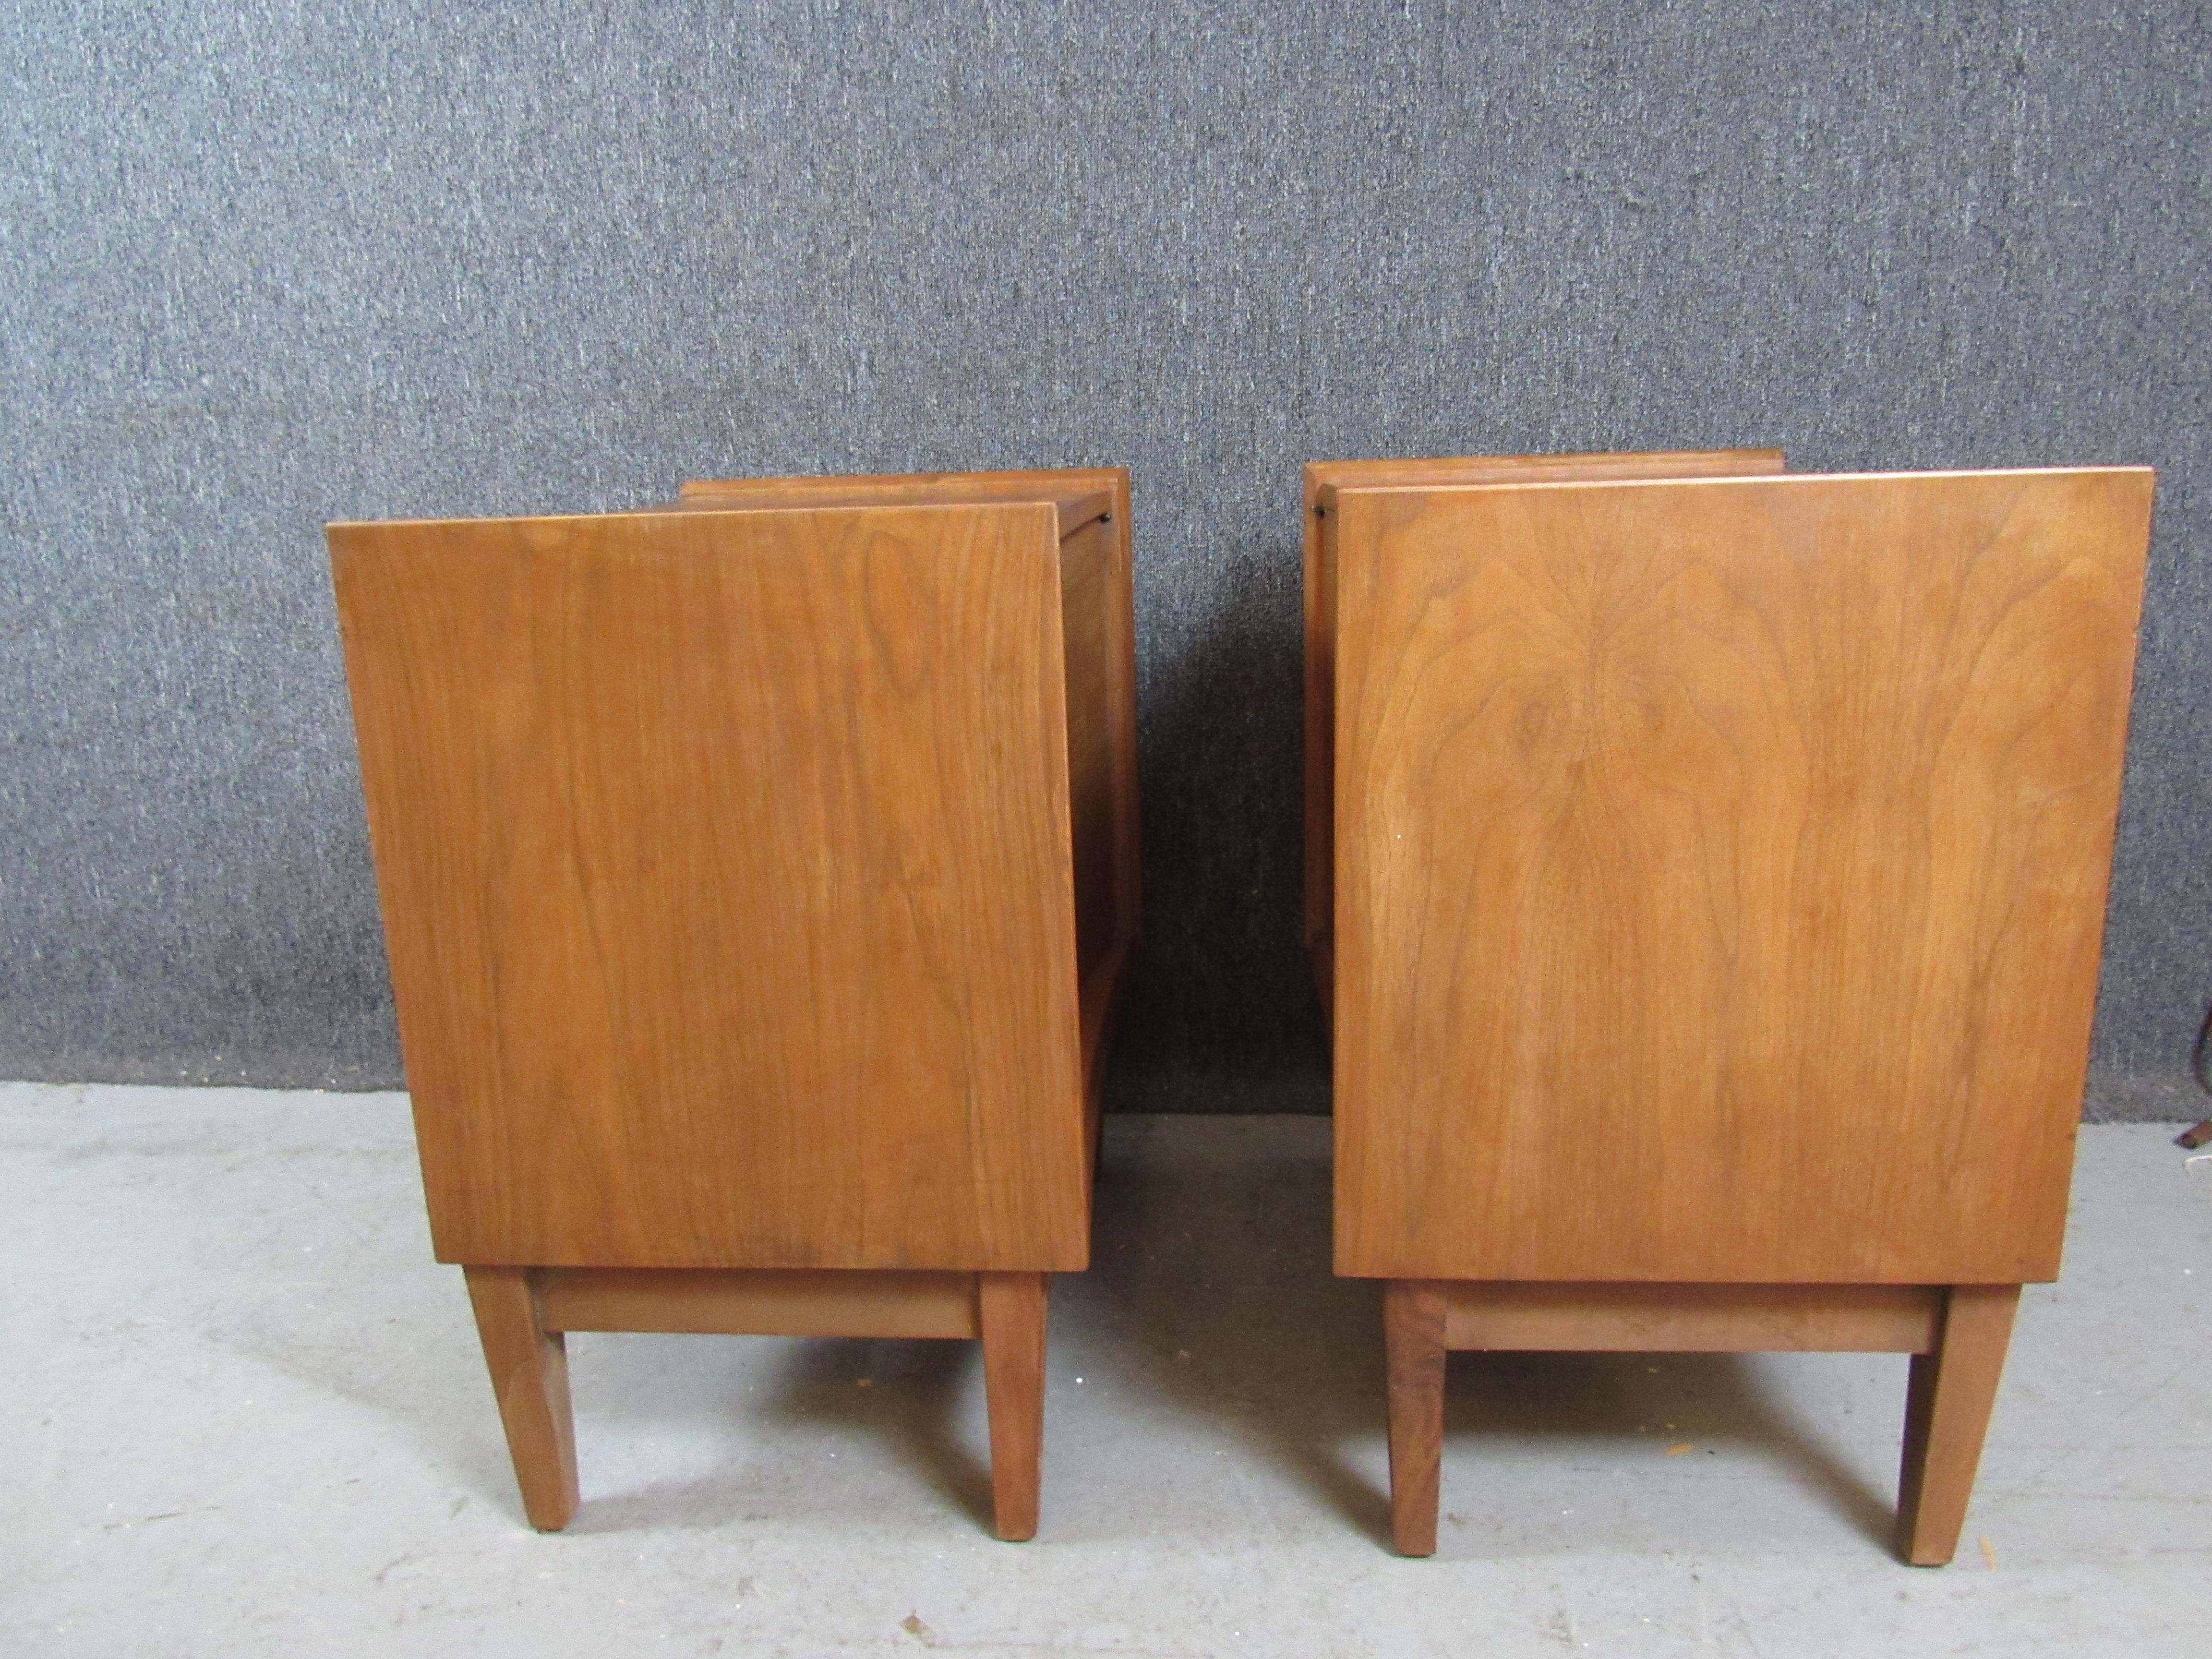 Swedish Mid-Century Side Tables By Karlit of Sweden For Sale